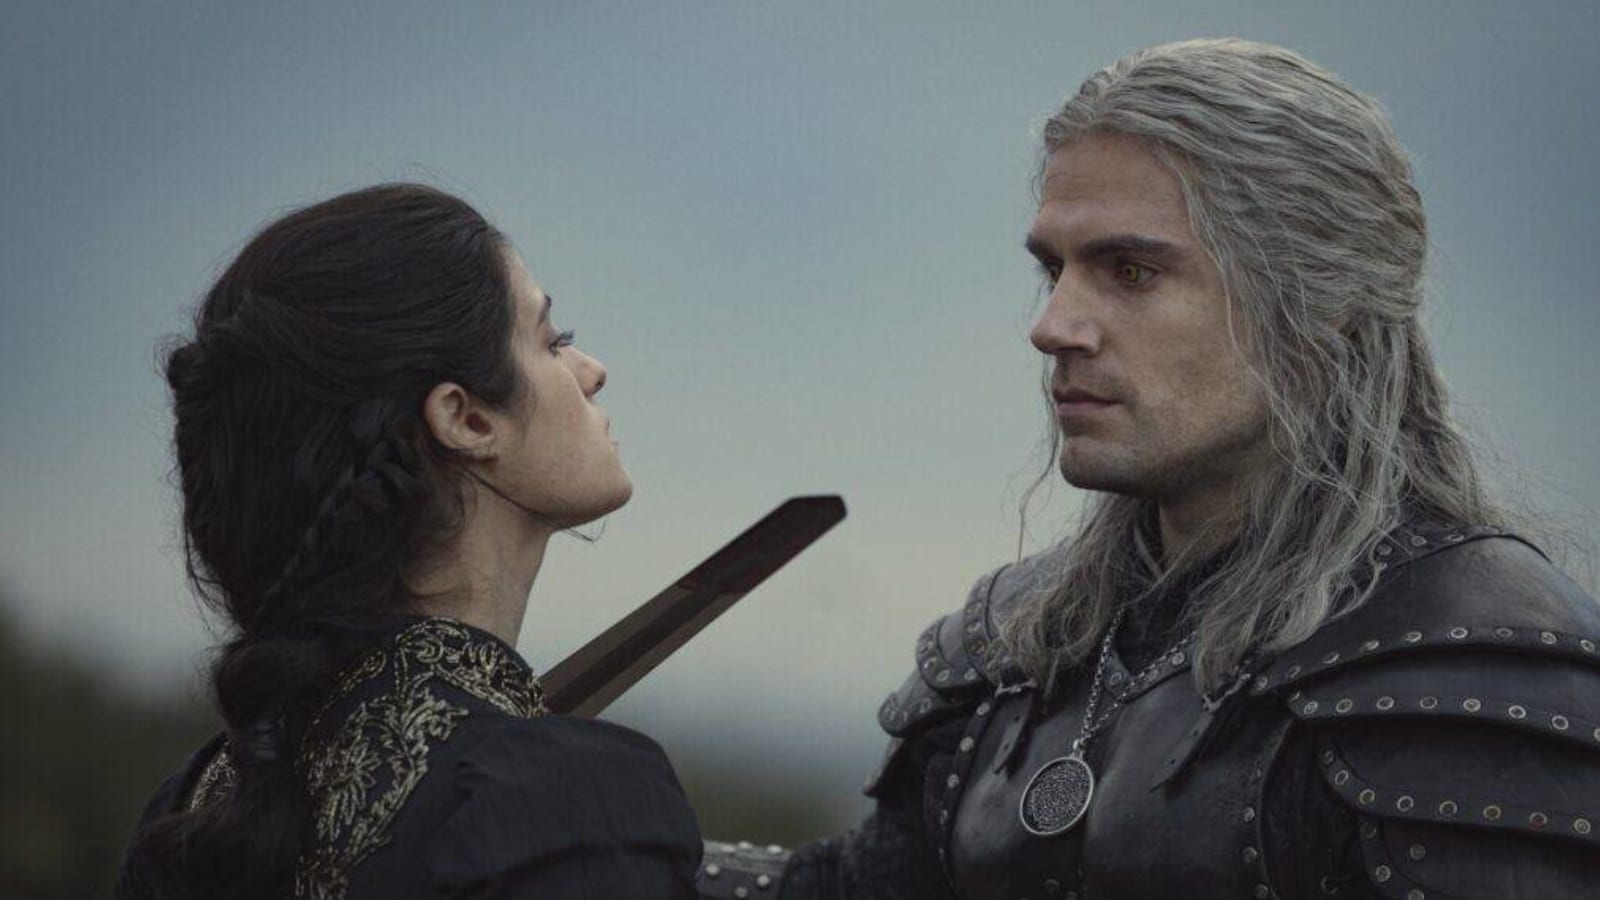 ‘The Witcher’ Author Says Netflix ‘Never Listened’ to His Suggestions